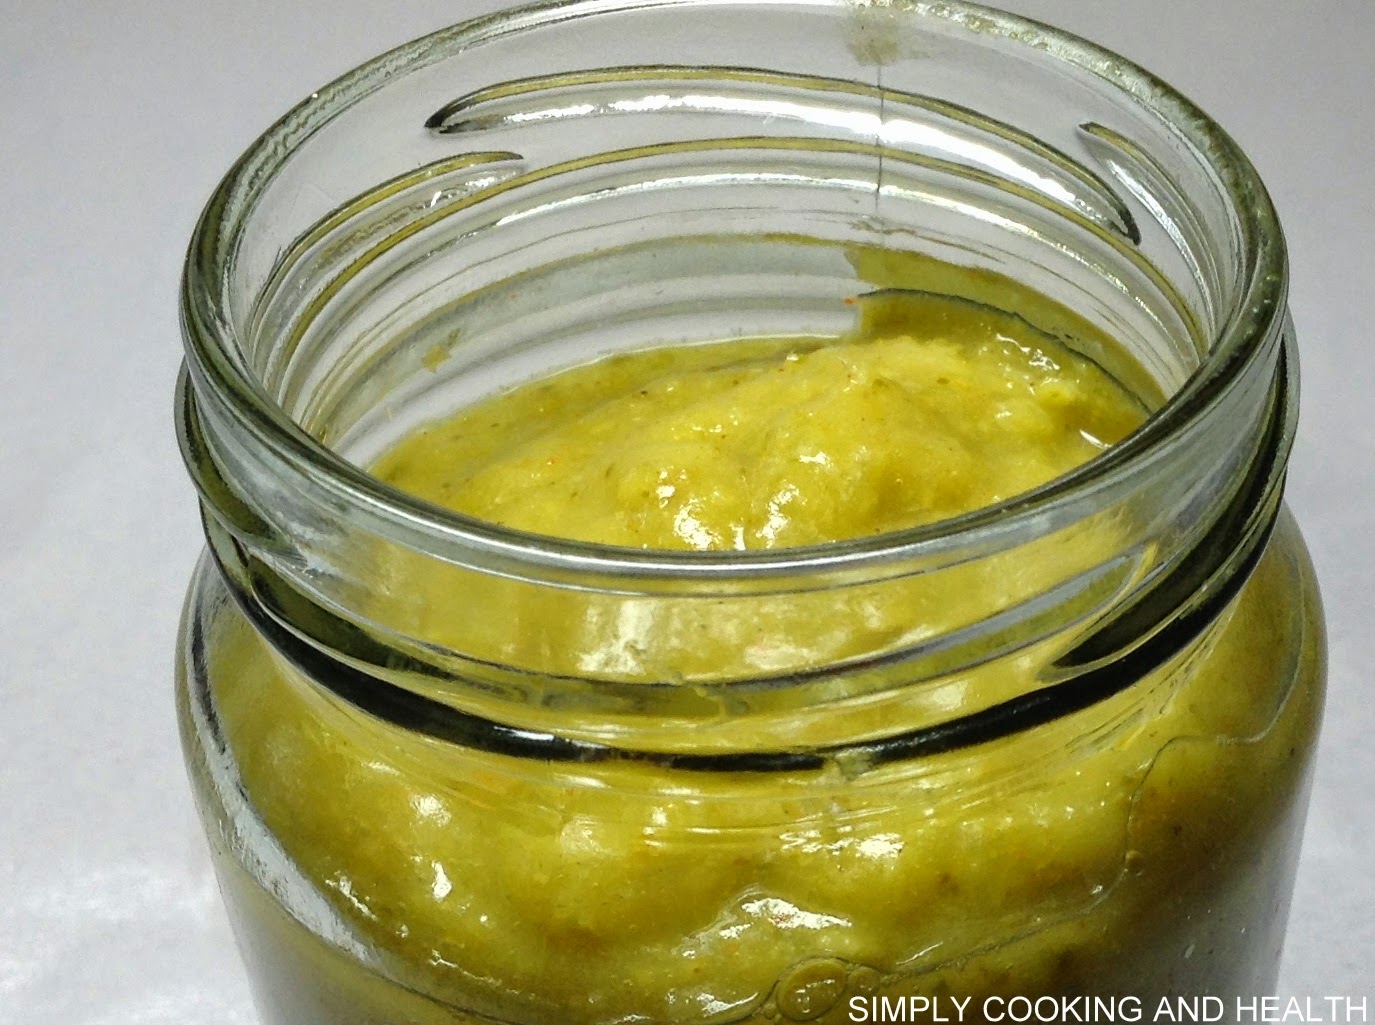 Simply Cooking and Health: Mango Dip and mango pickle